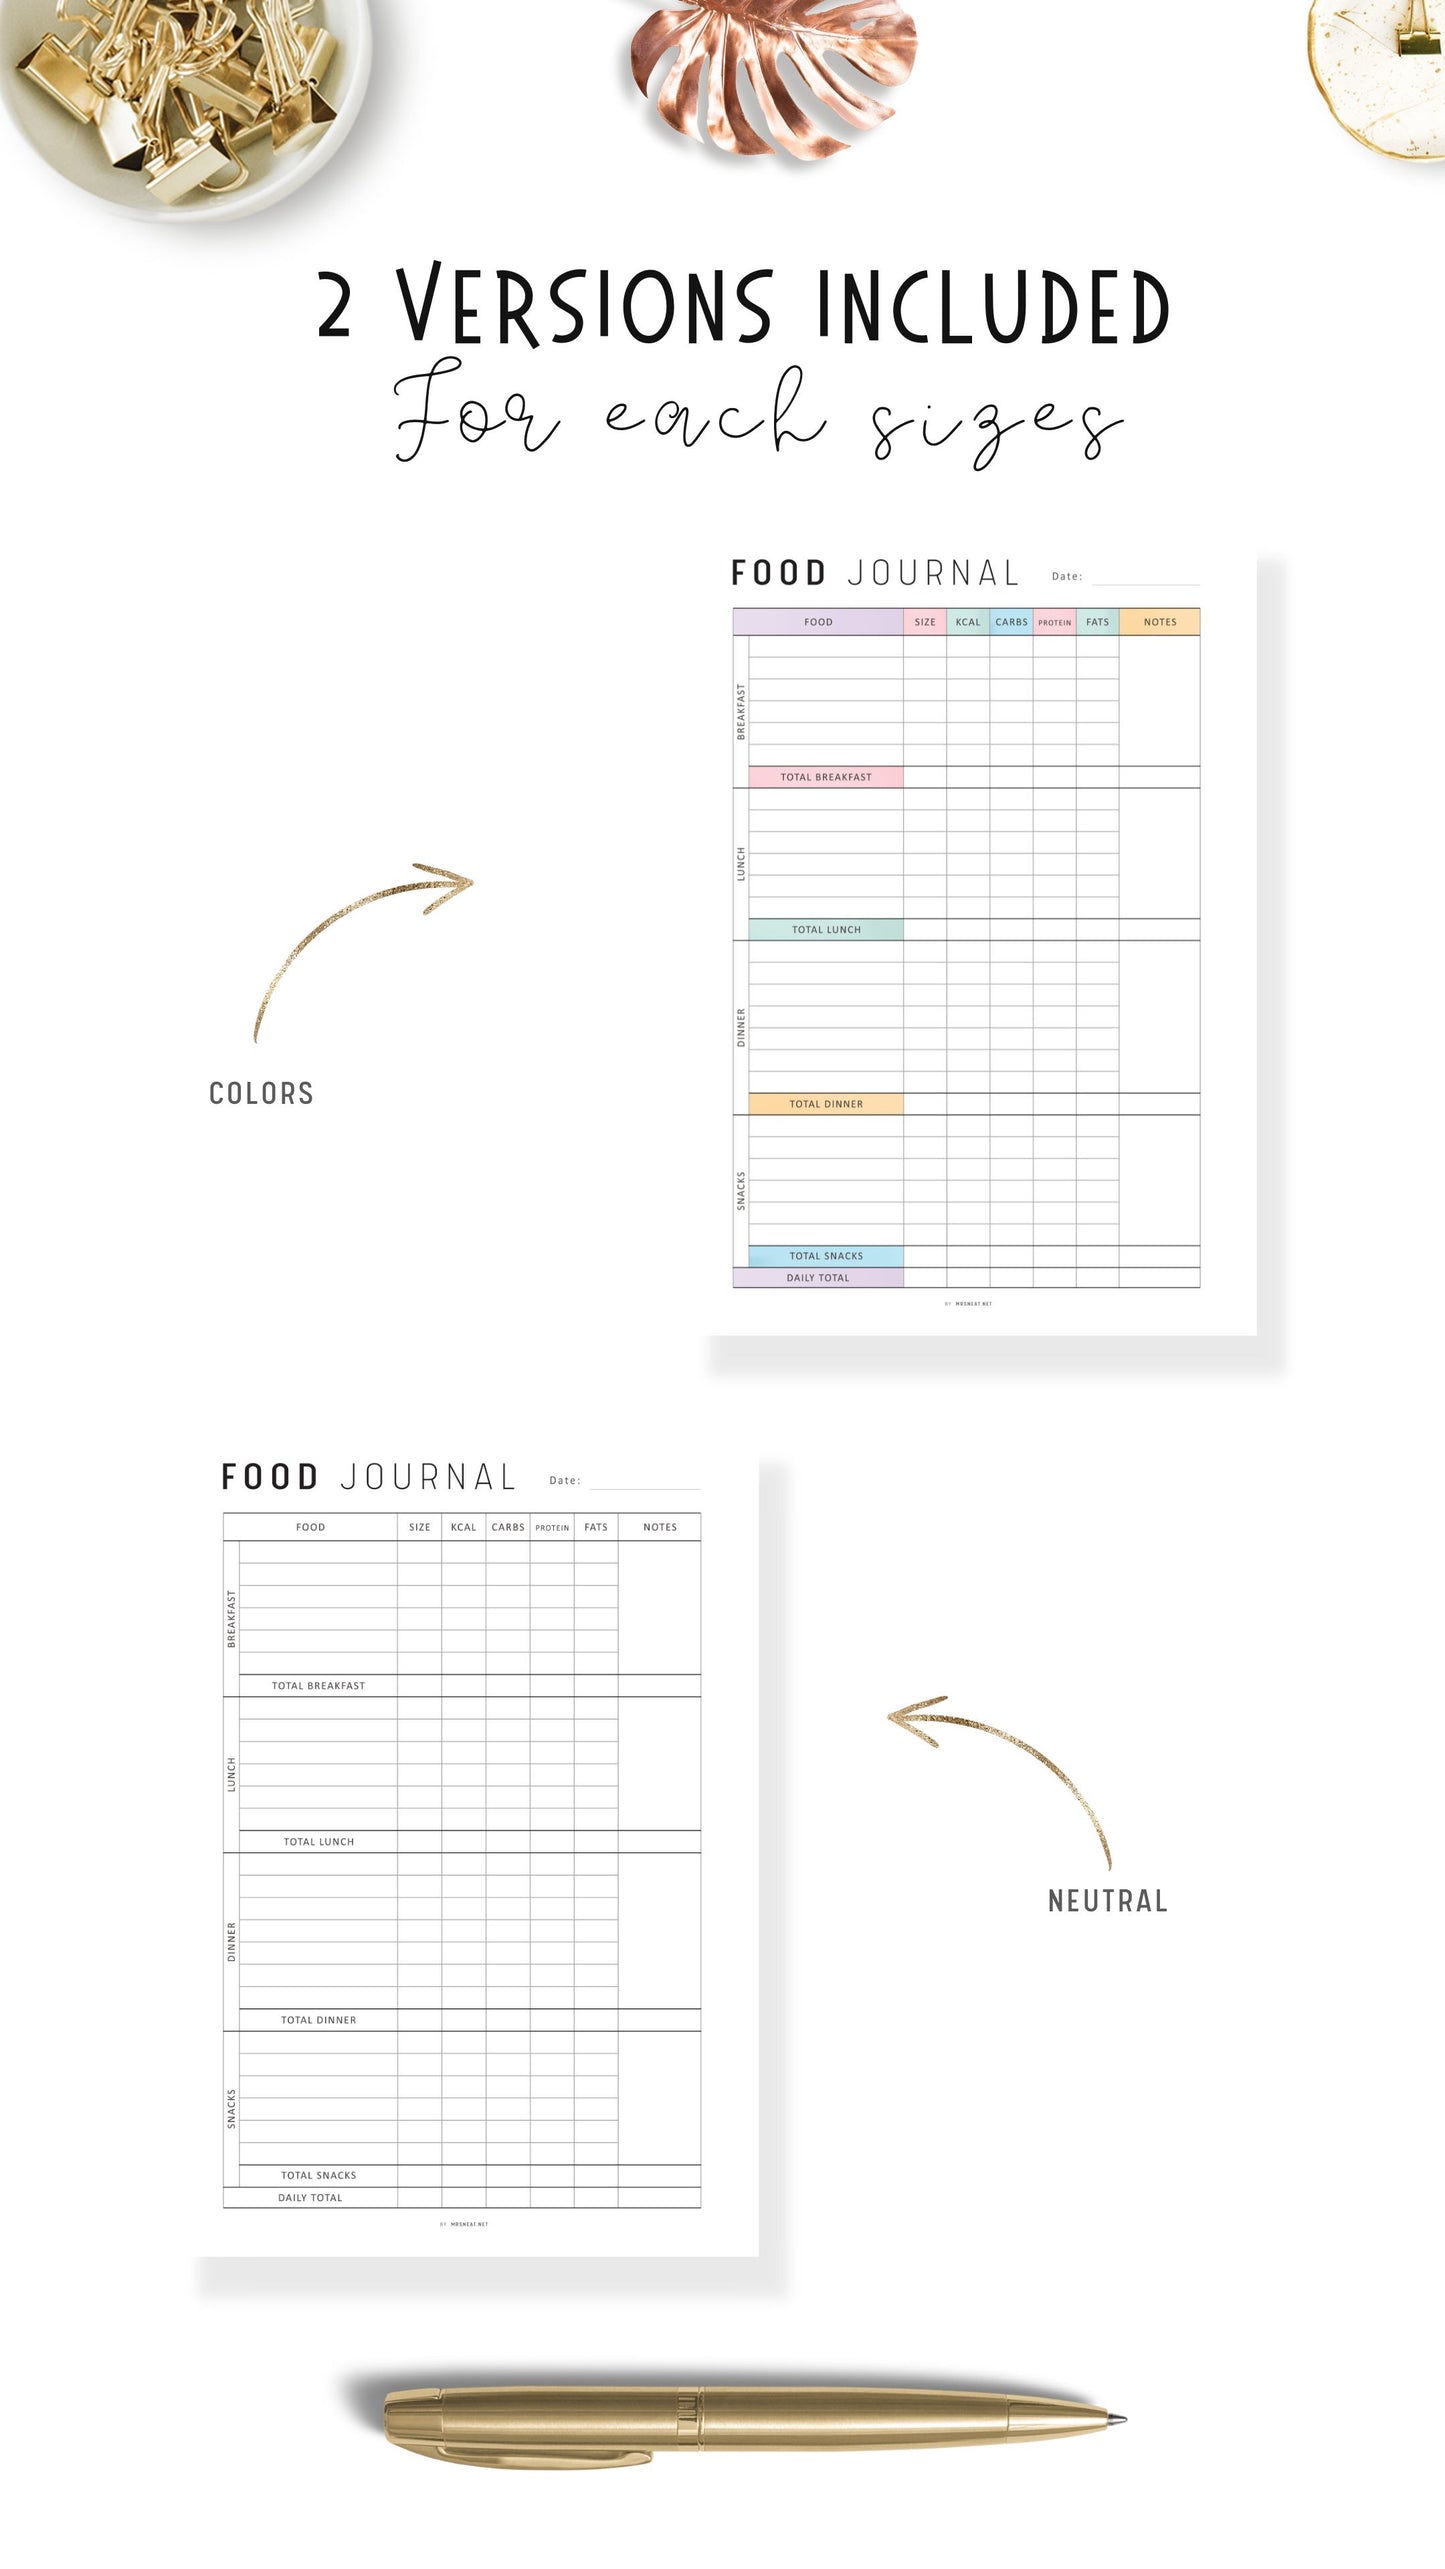 Daily Calorie Tracker Template Printable, Calorie Counter PDF, My Food Diary, Digital Daily Food Journal, A4, A5, Letter, Half Letter, Colorful Page